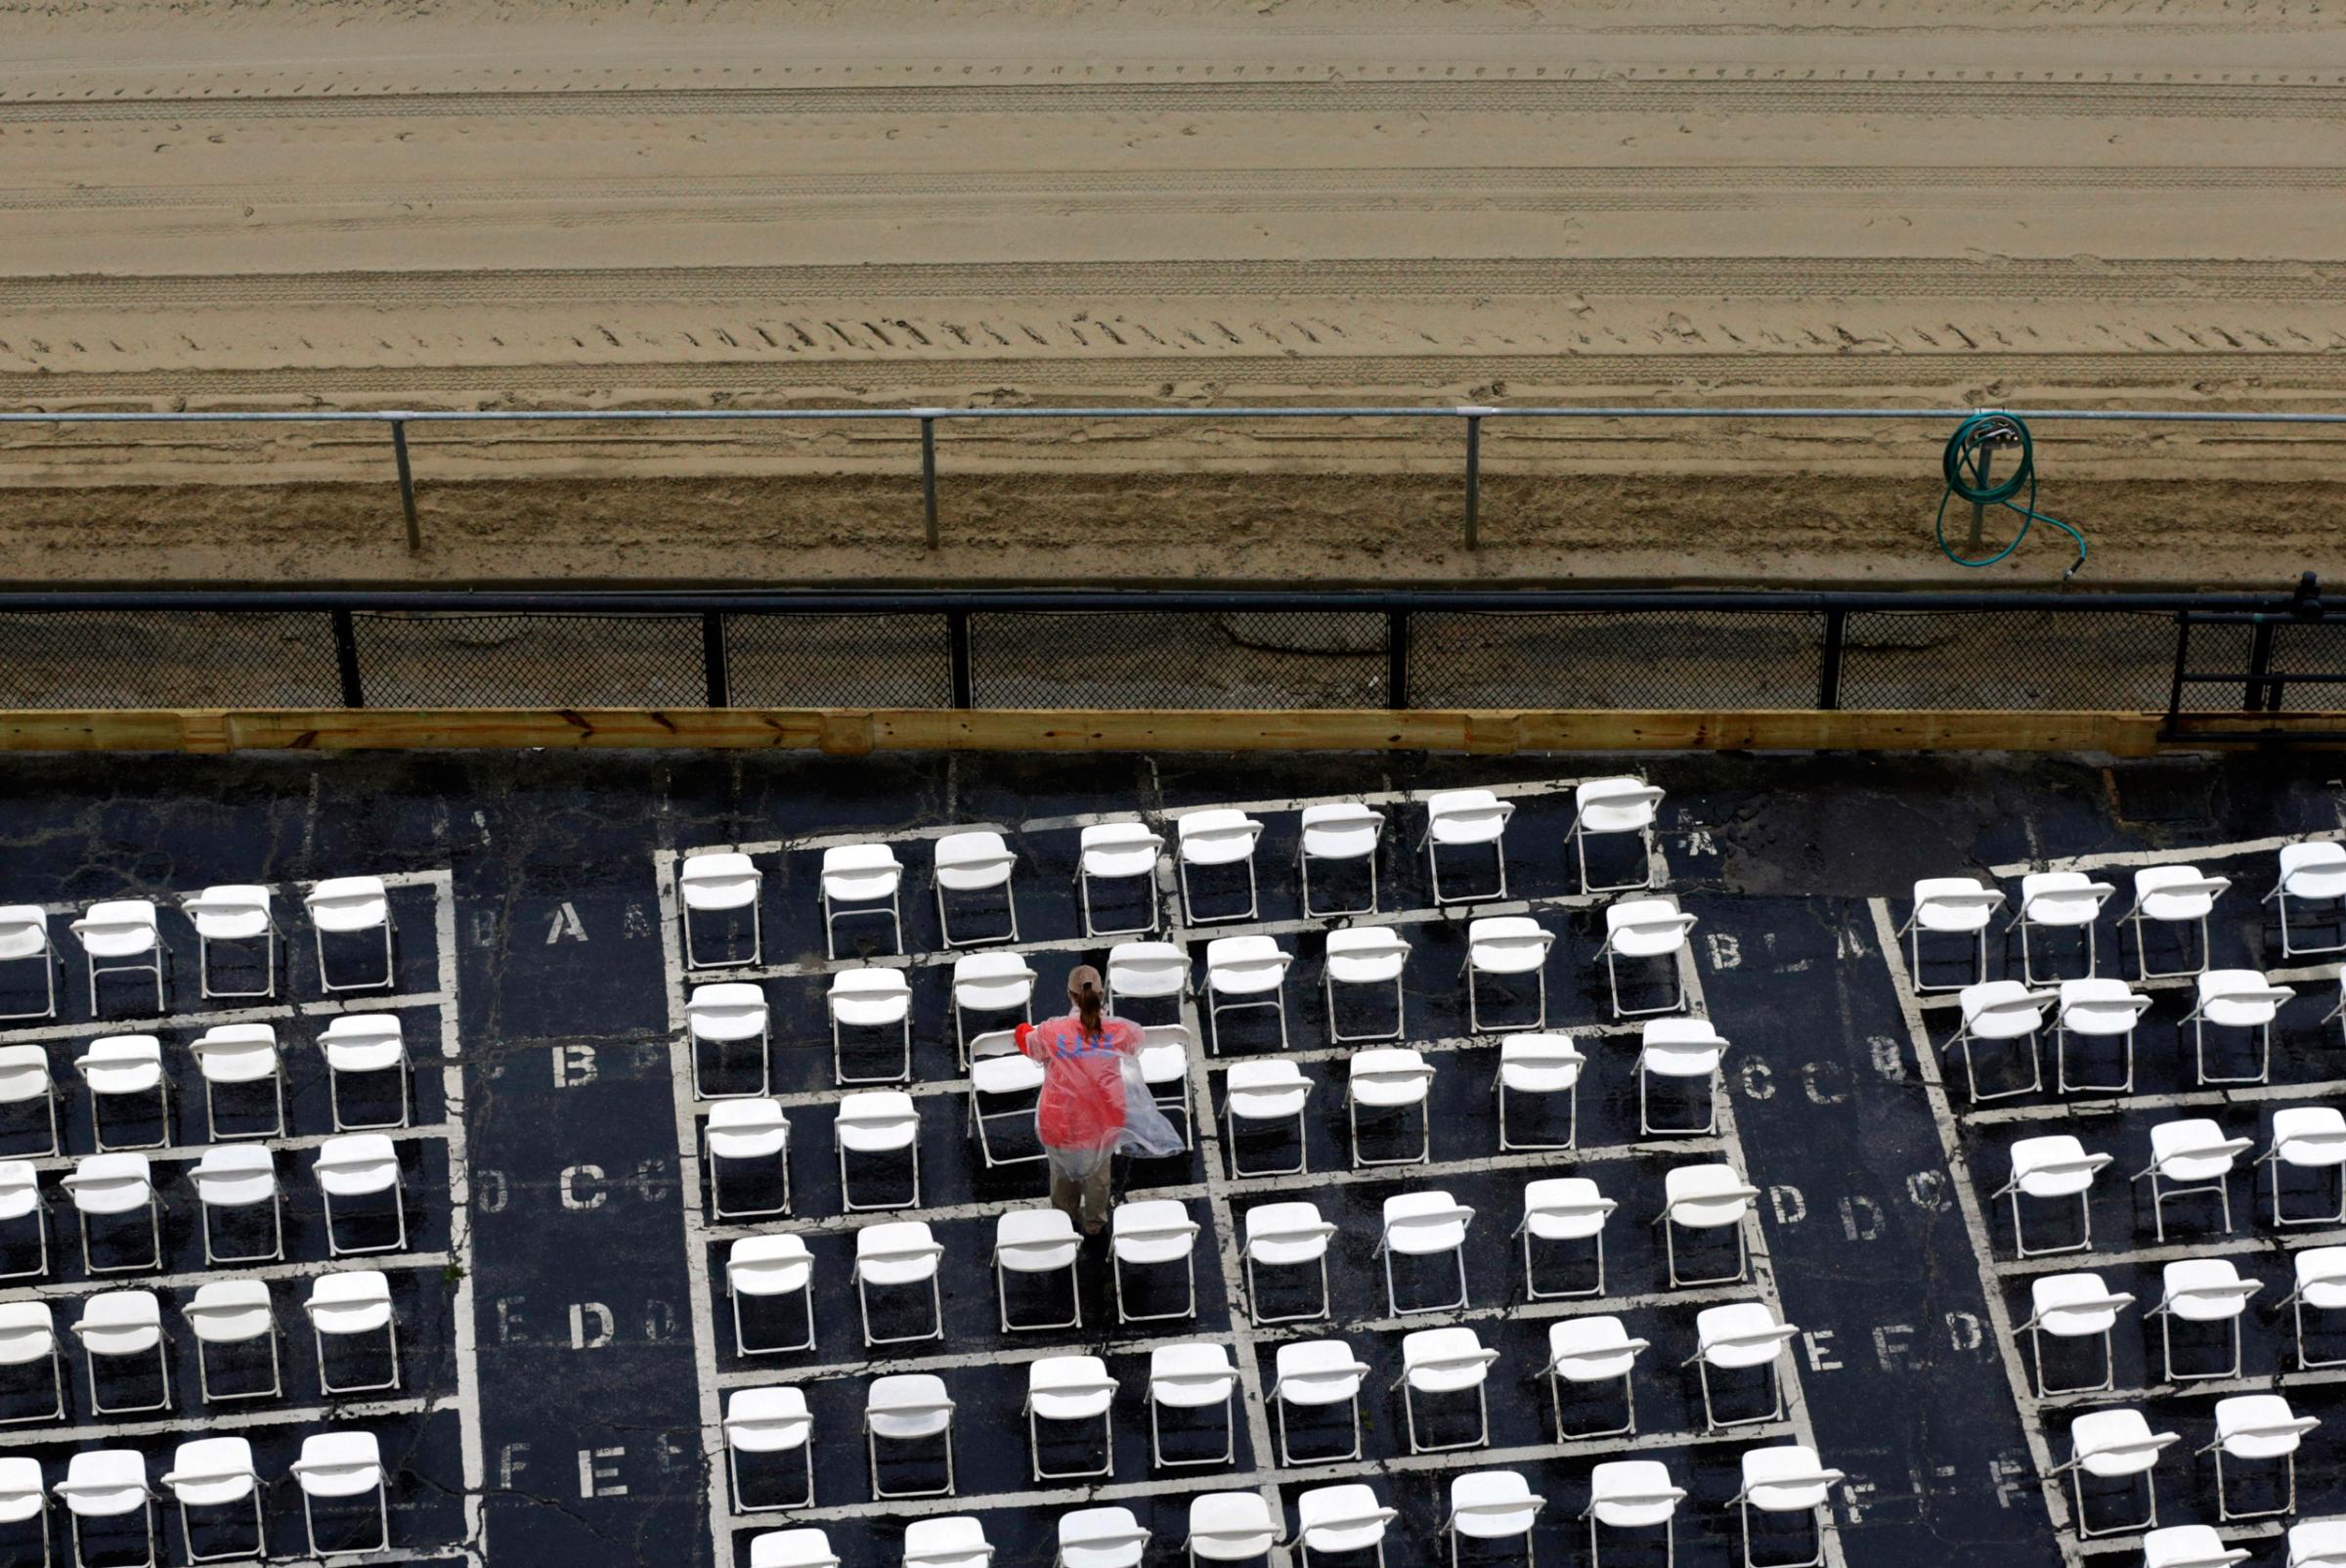 An usher clears water off of trackside seats as rain falls before the 141st running of the Preakness Stakes horse race at Pimlico Race Course in Baltimore, Saturday, May 21, 2016. (AP Photo/Patrick Semansky)